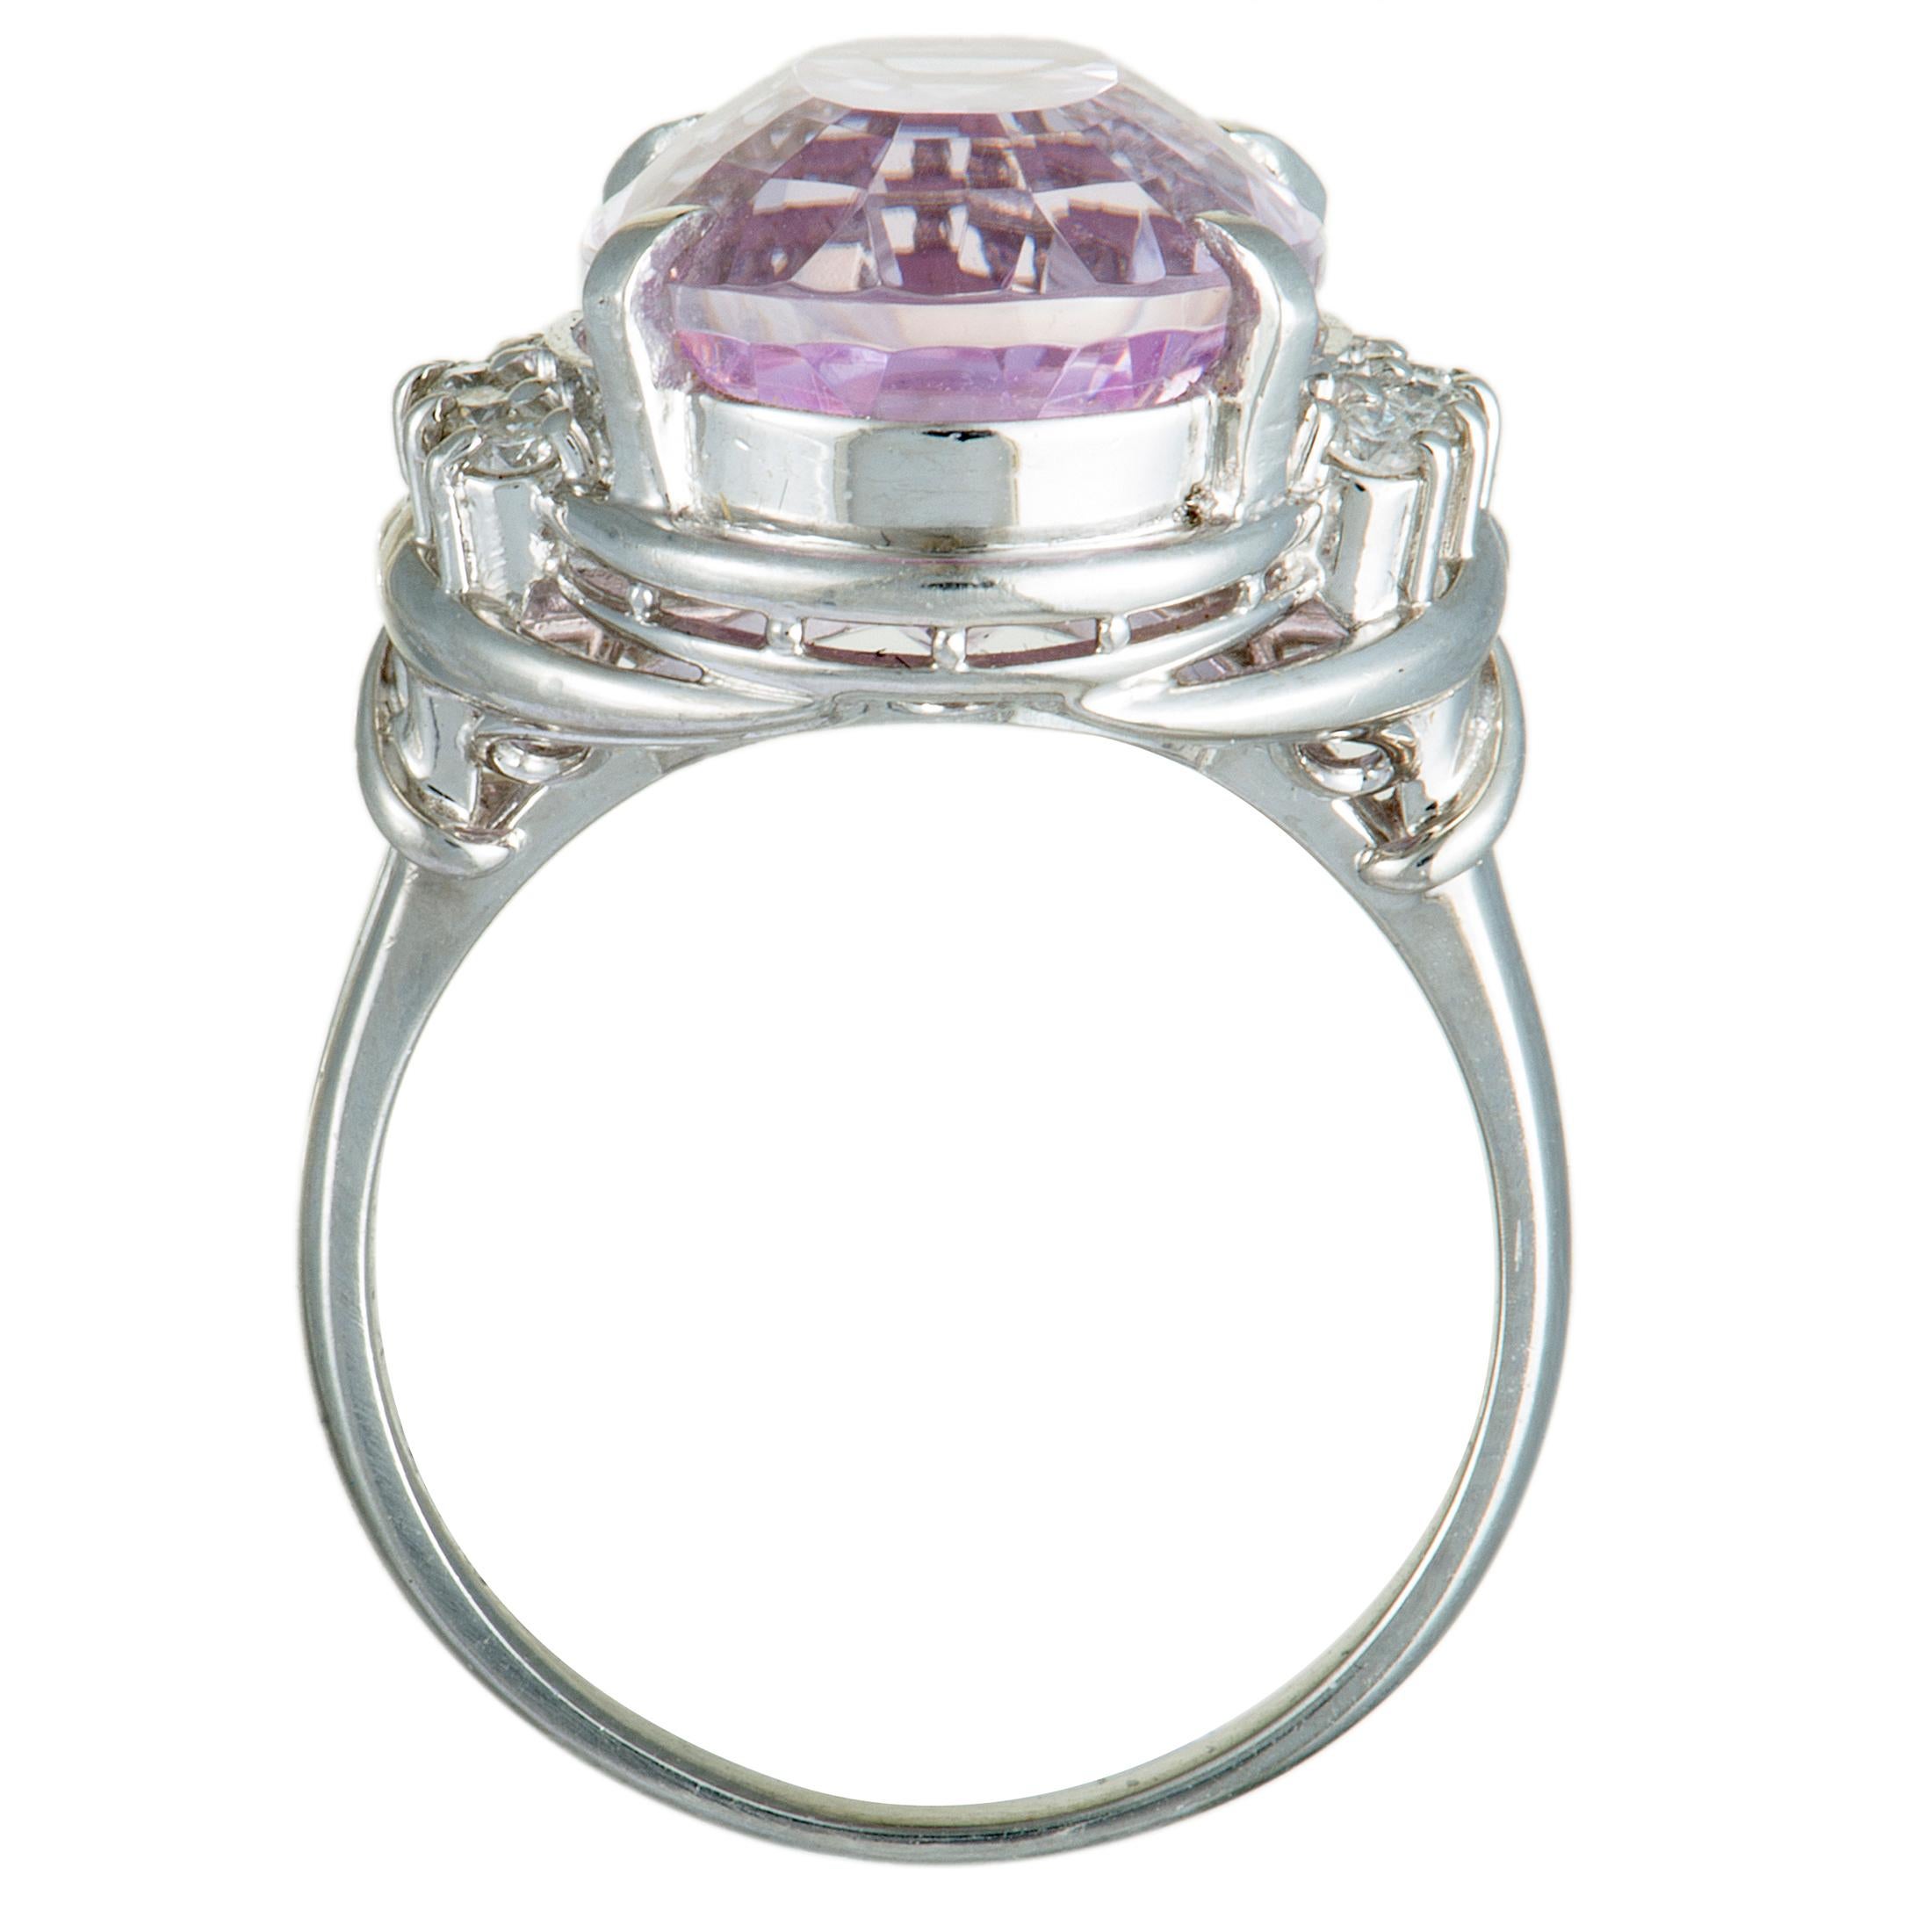 The alluring tone of kunzite is beautifully brought out by the scintillating brilliance of diamonds in this fabulous ring that offers an incredibly attractive appearance. The ring is wonderfully made of luxurious platinum and boasts a total of 0.20